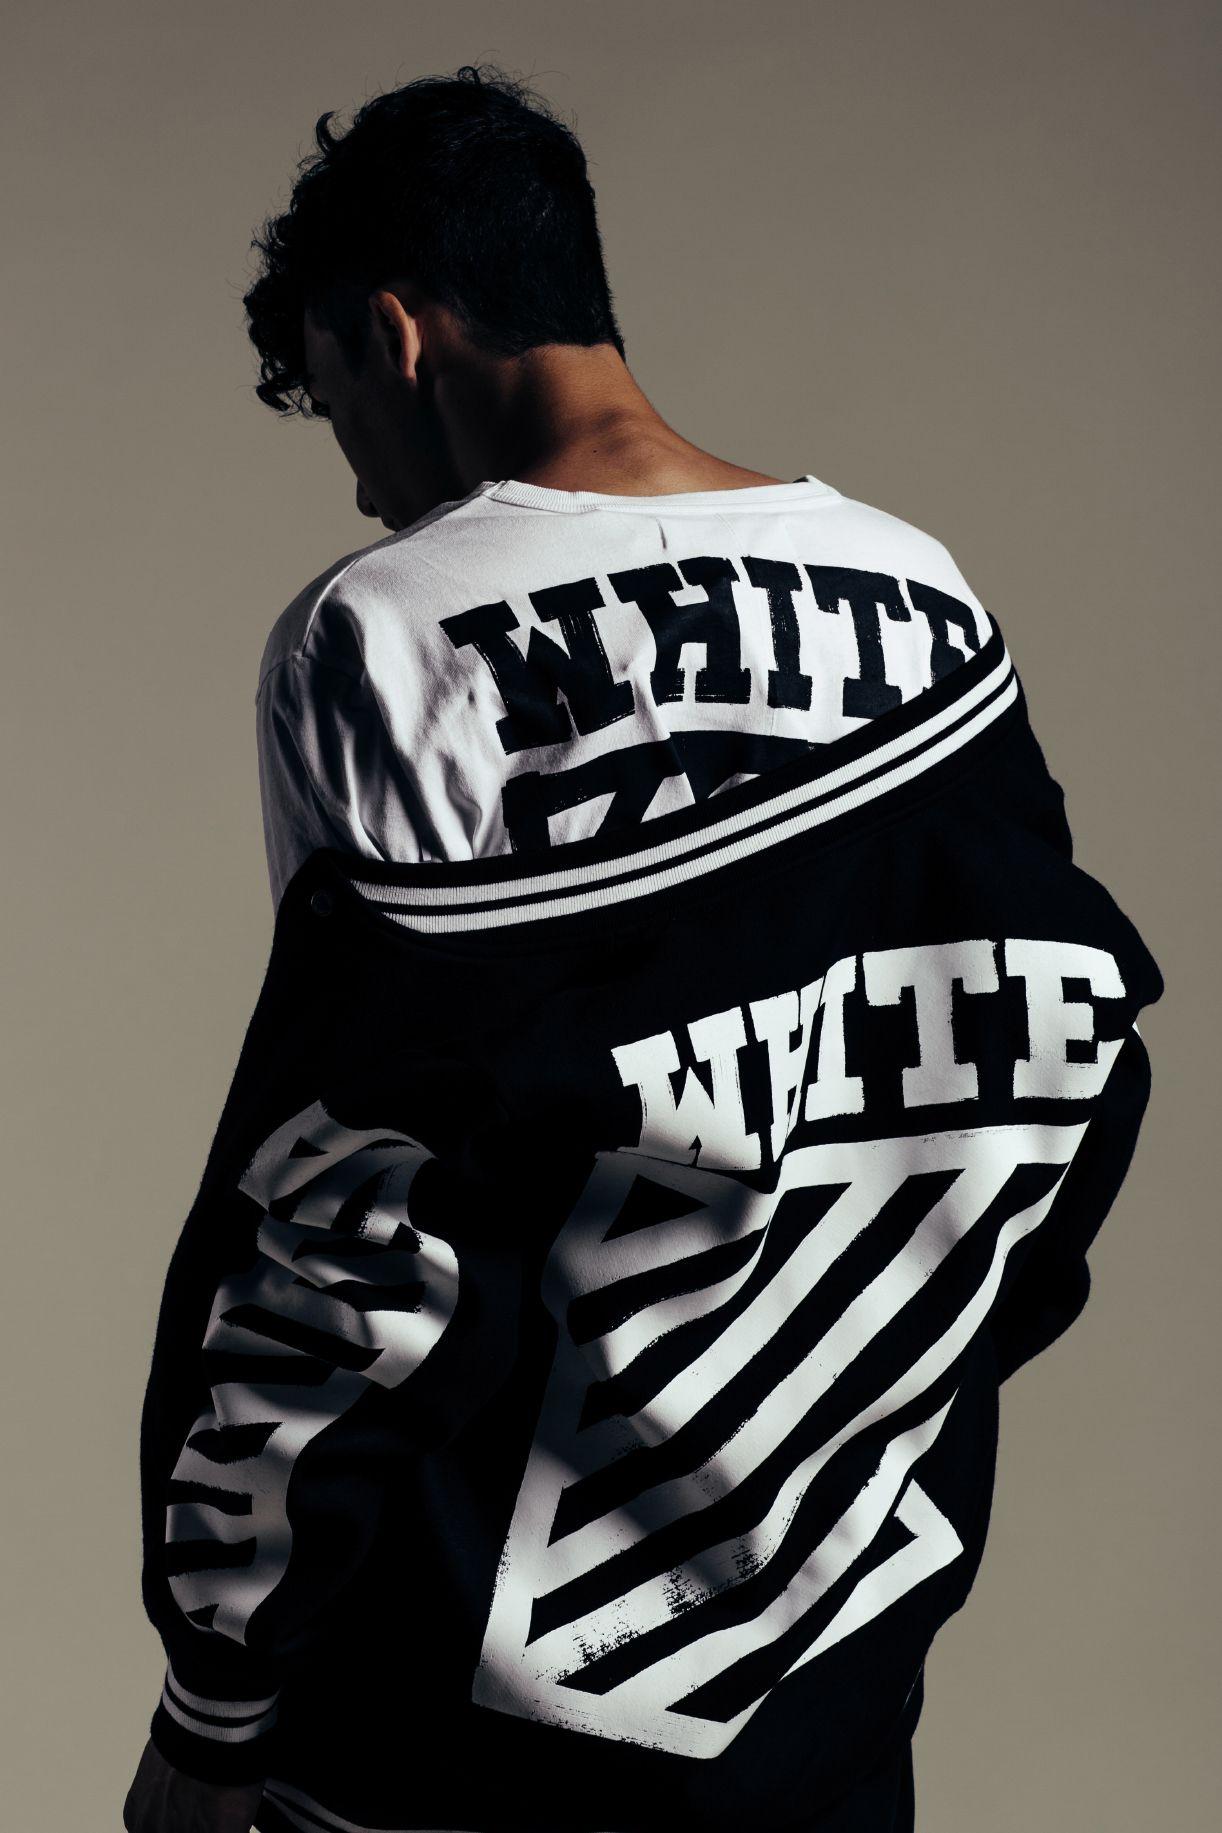 Off White Clothing Logo - Off-white supreme hype beast apparel #Supreme #Off-White #HypeBeast ...